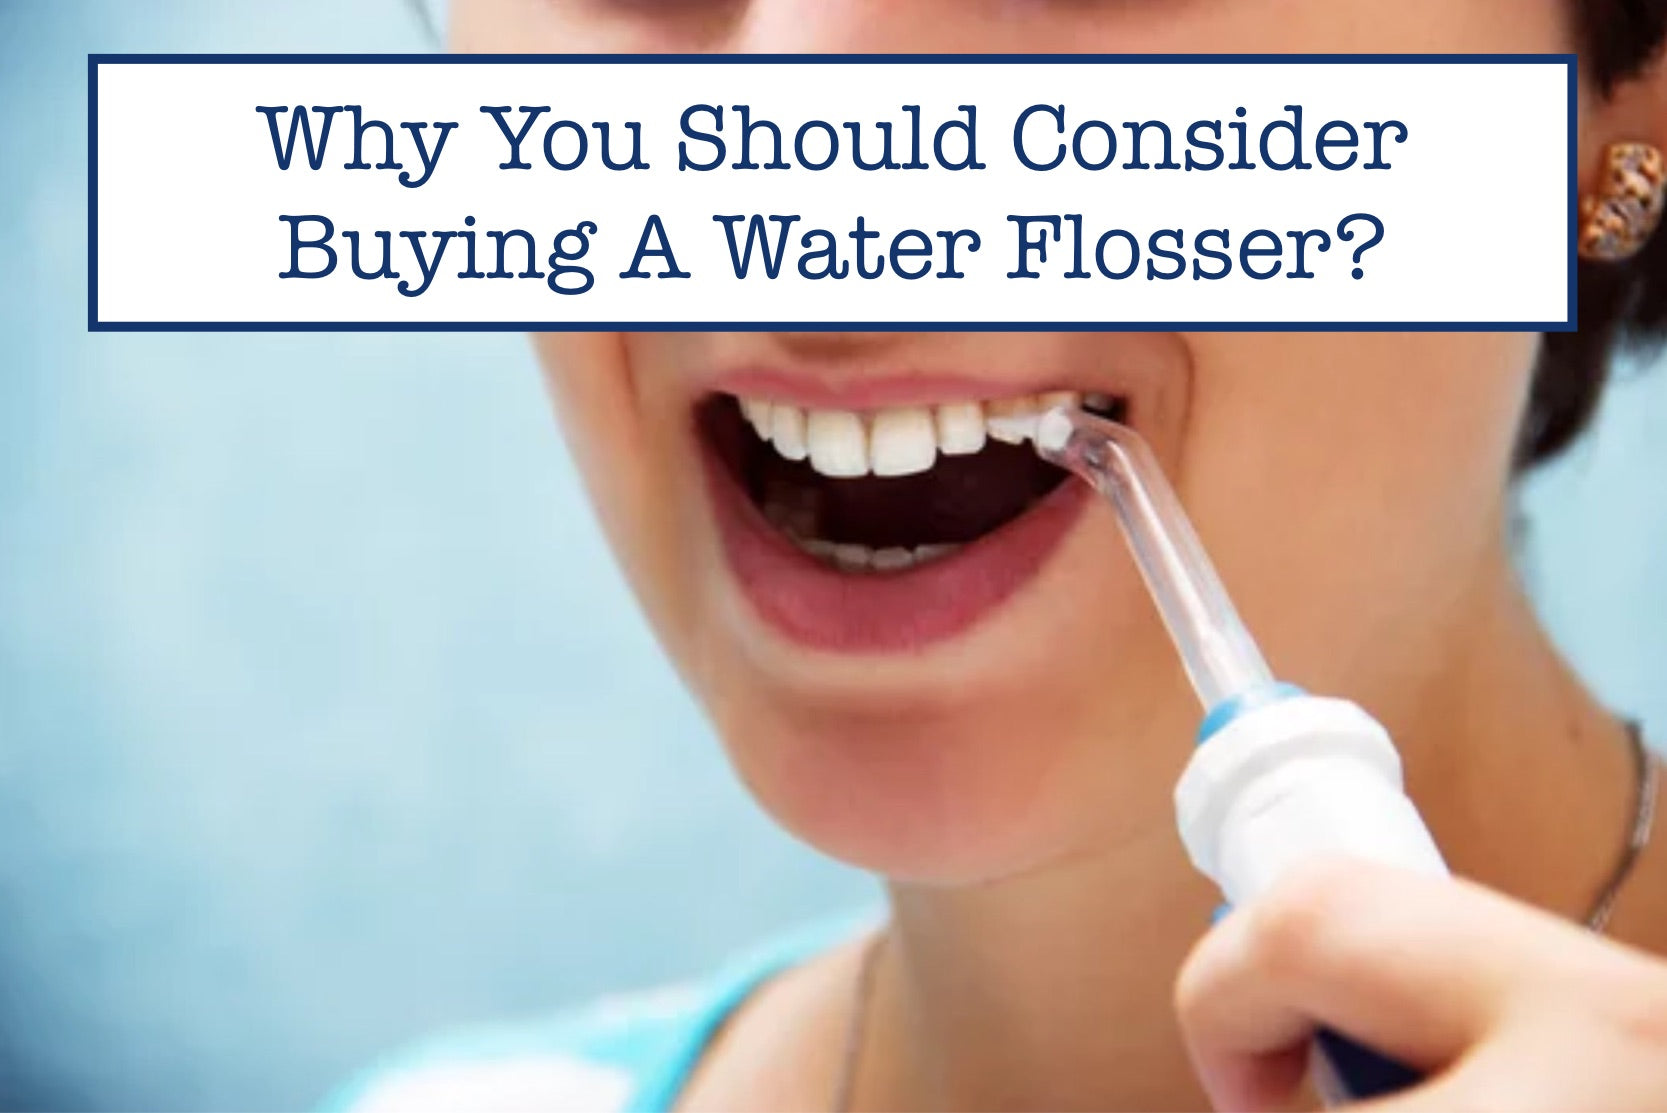 Why You Should Consider Buying A Water Flosser